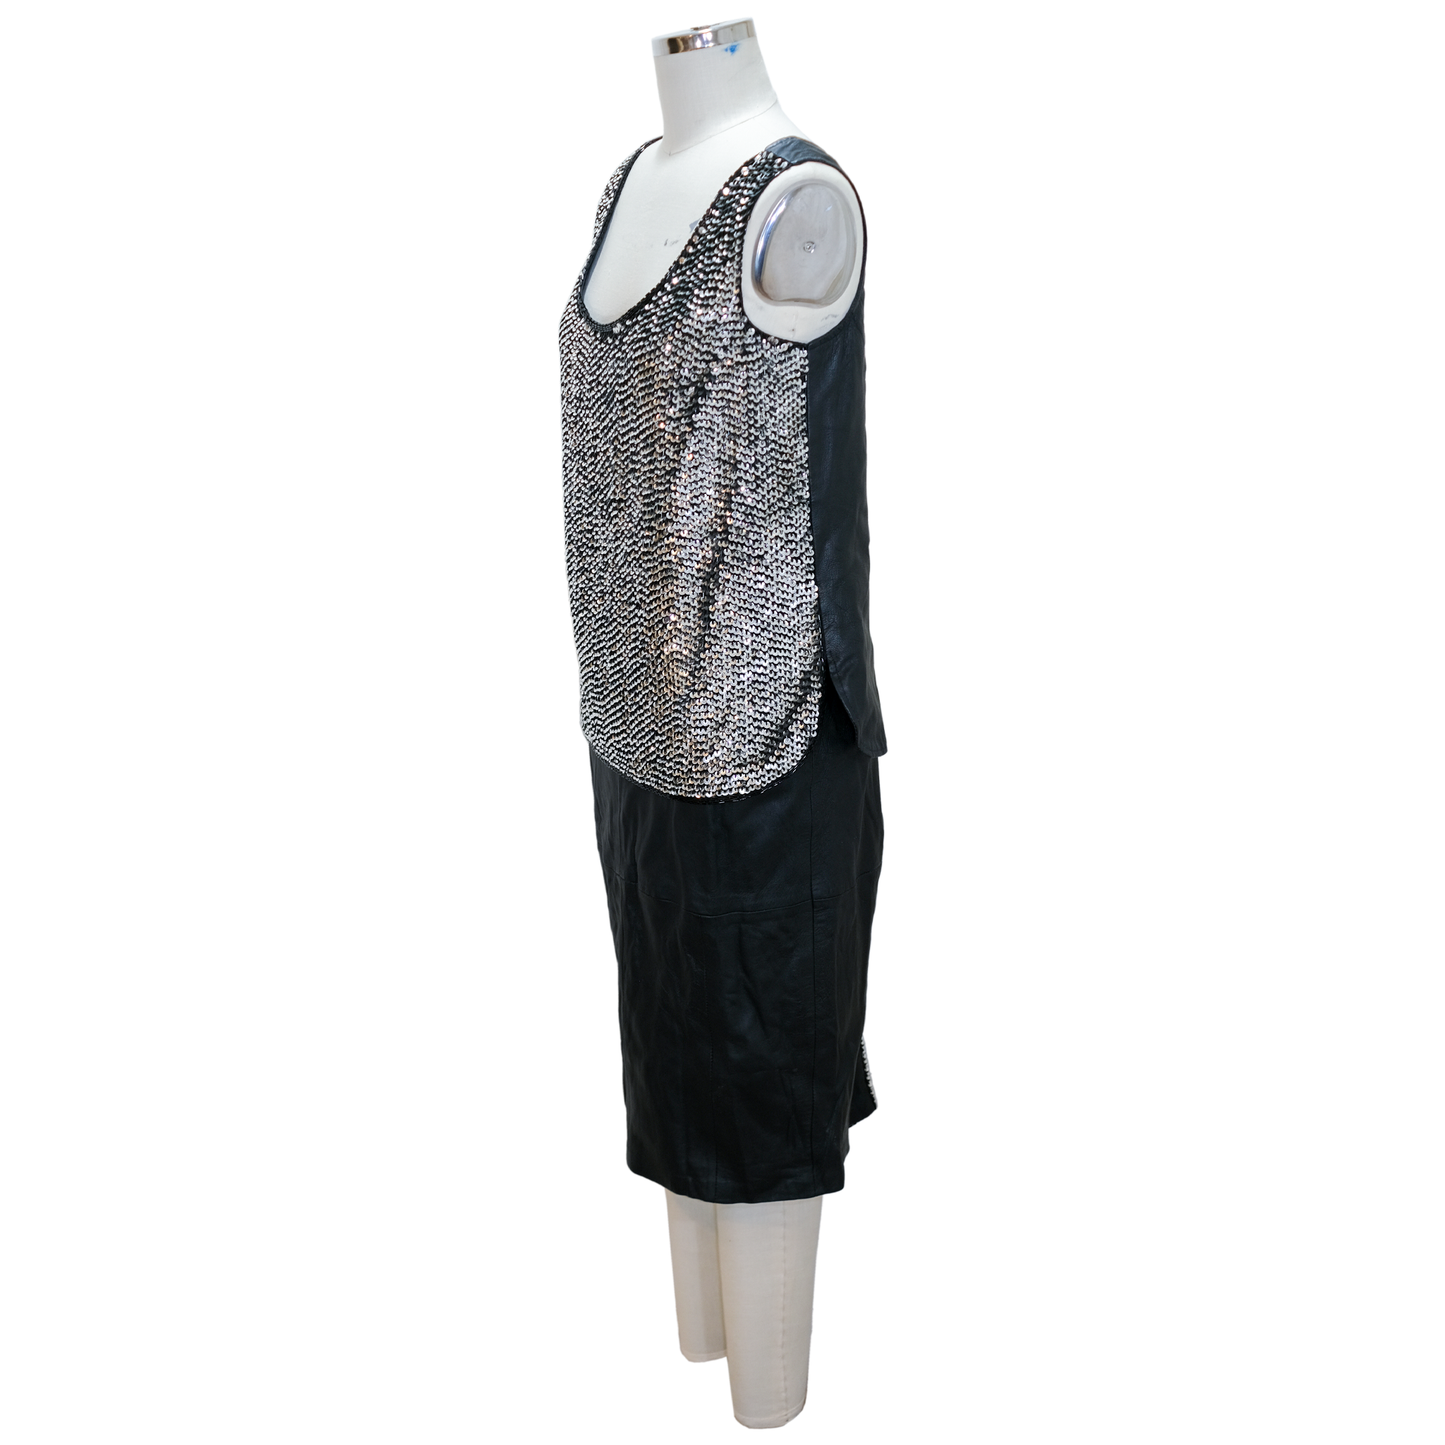 Vintage Leather and Sequin Skirt and Tank Top 2 Piece Set - Size Medium